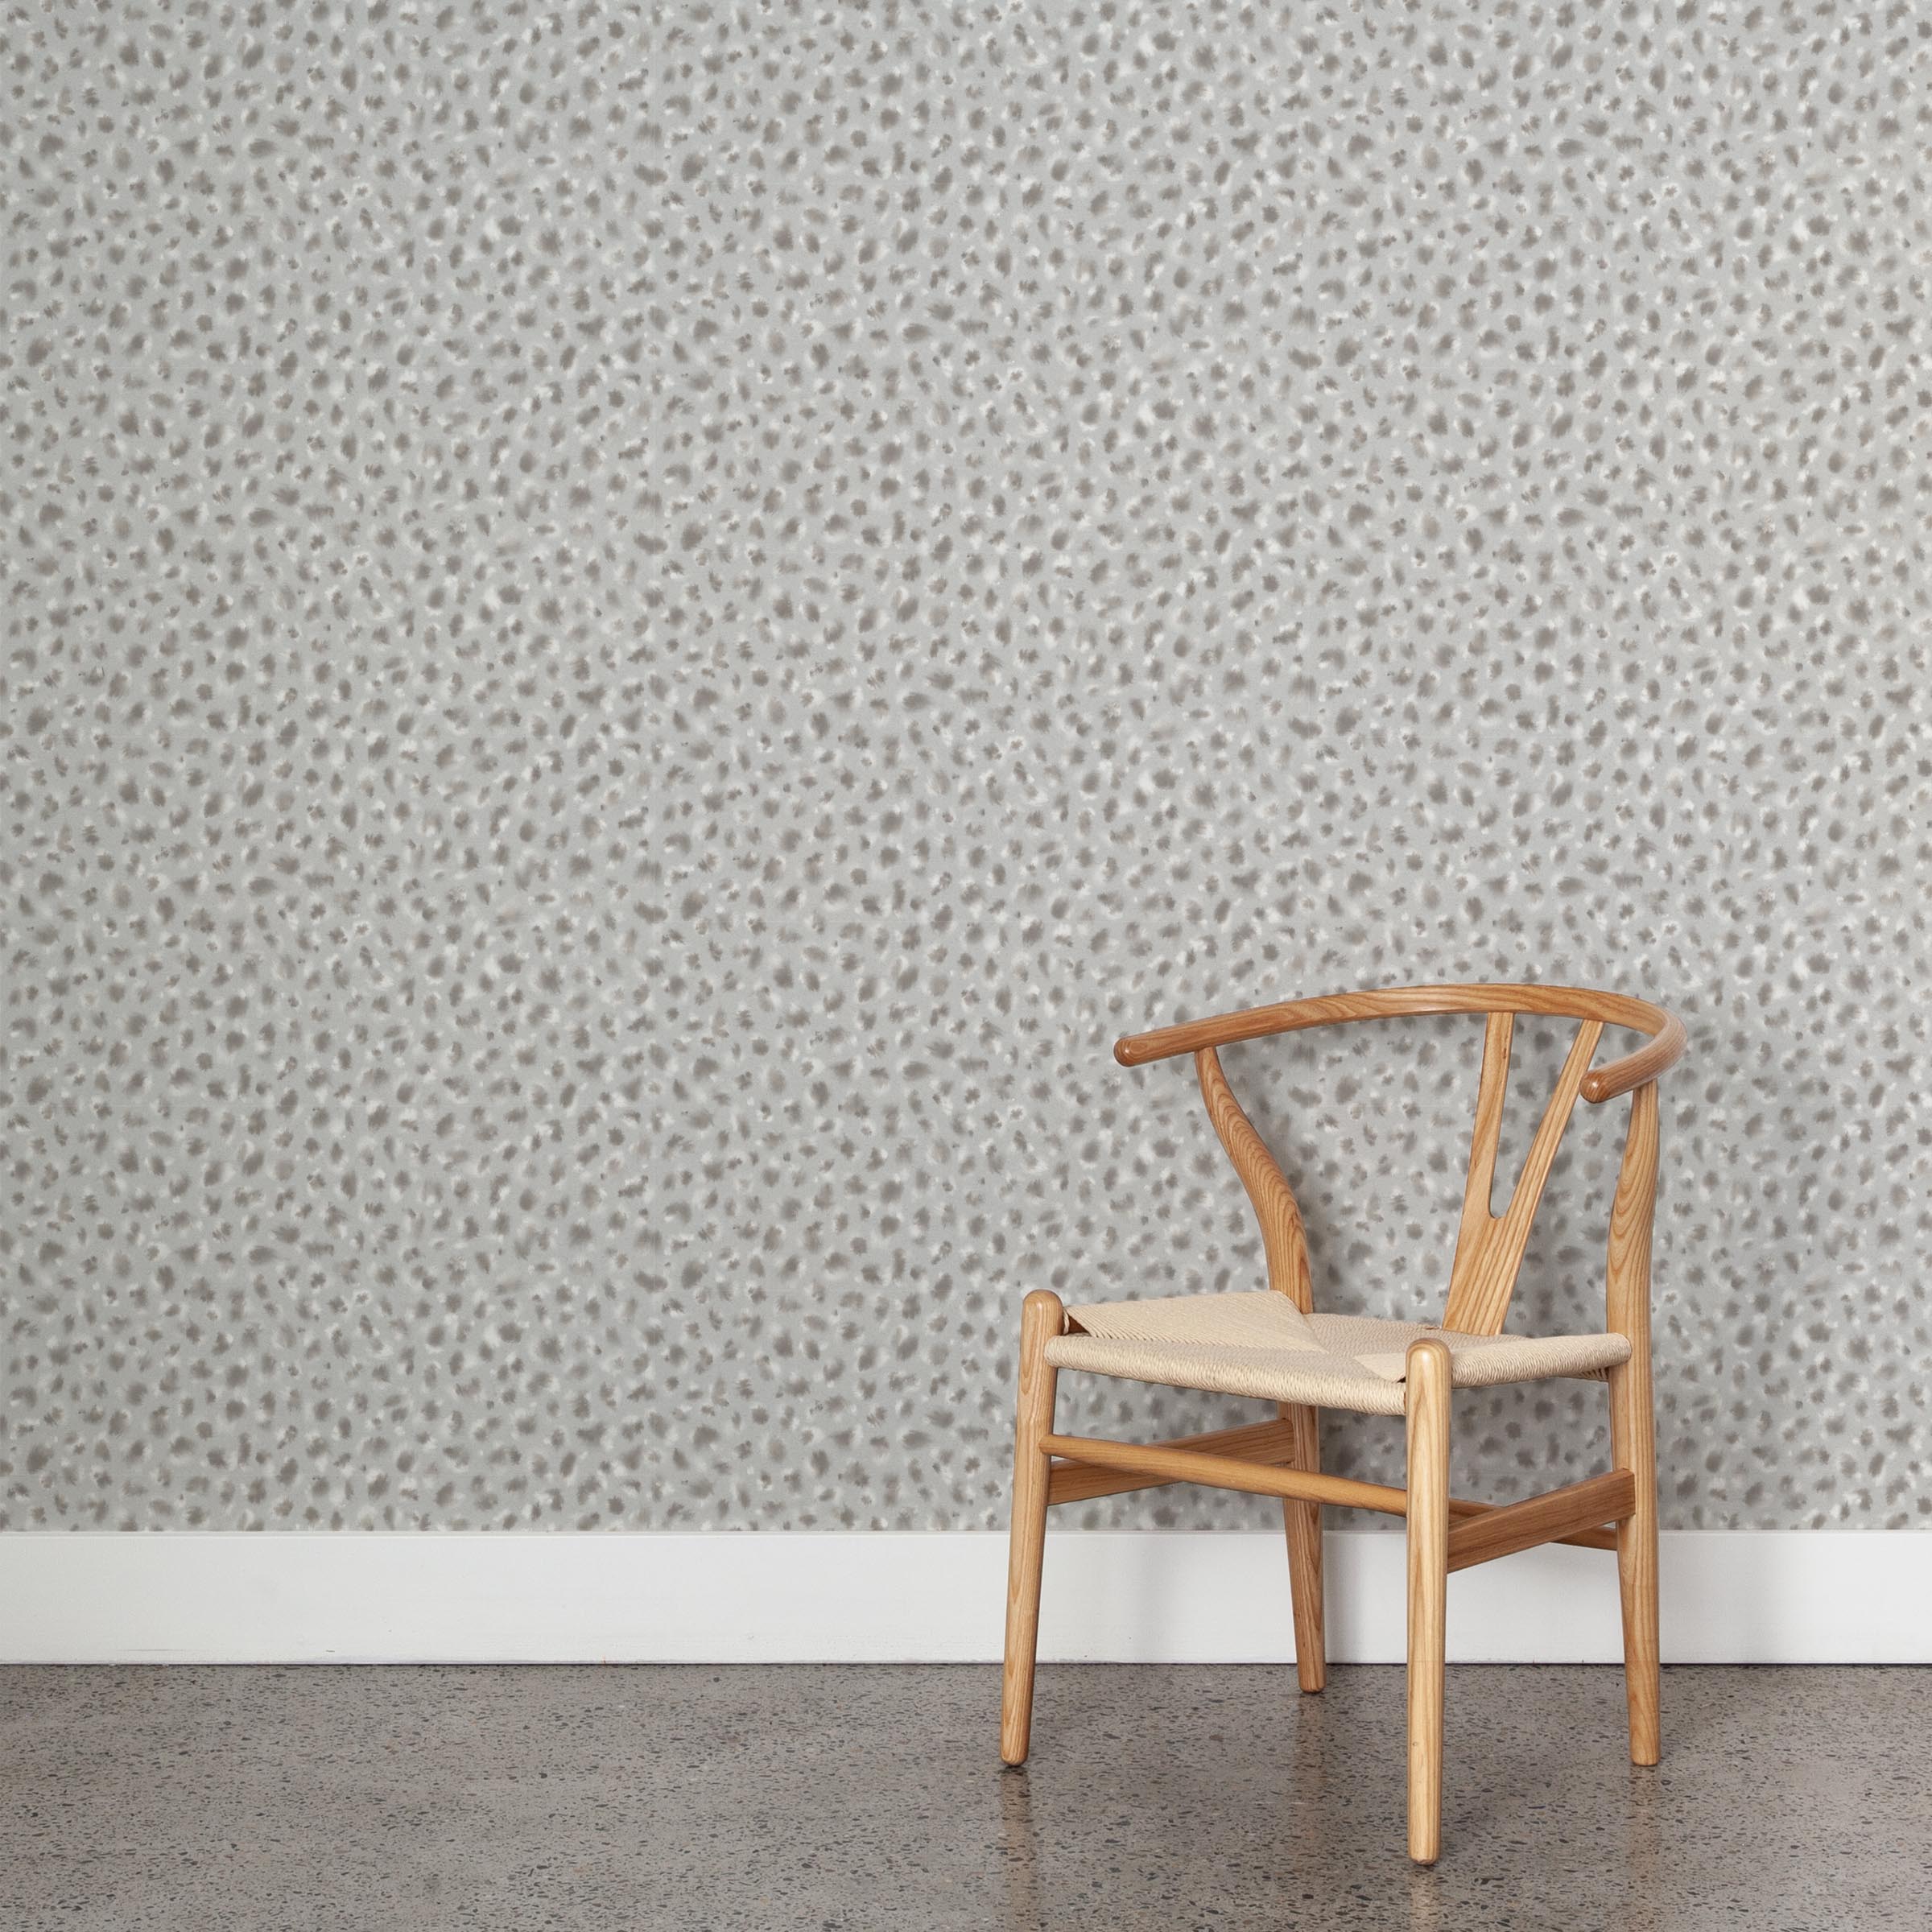 A wooden chair stands in front of a wall papered in a painterly animal print in white and gray on a light gray field.